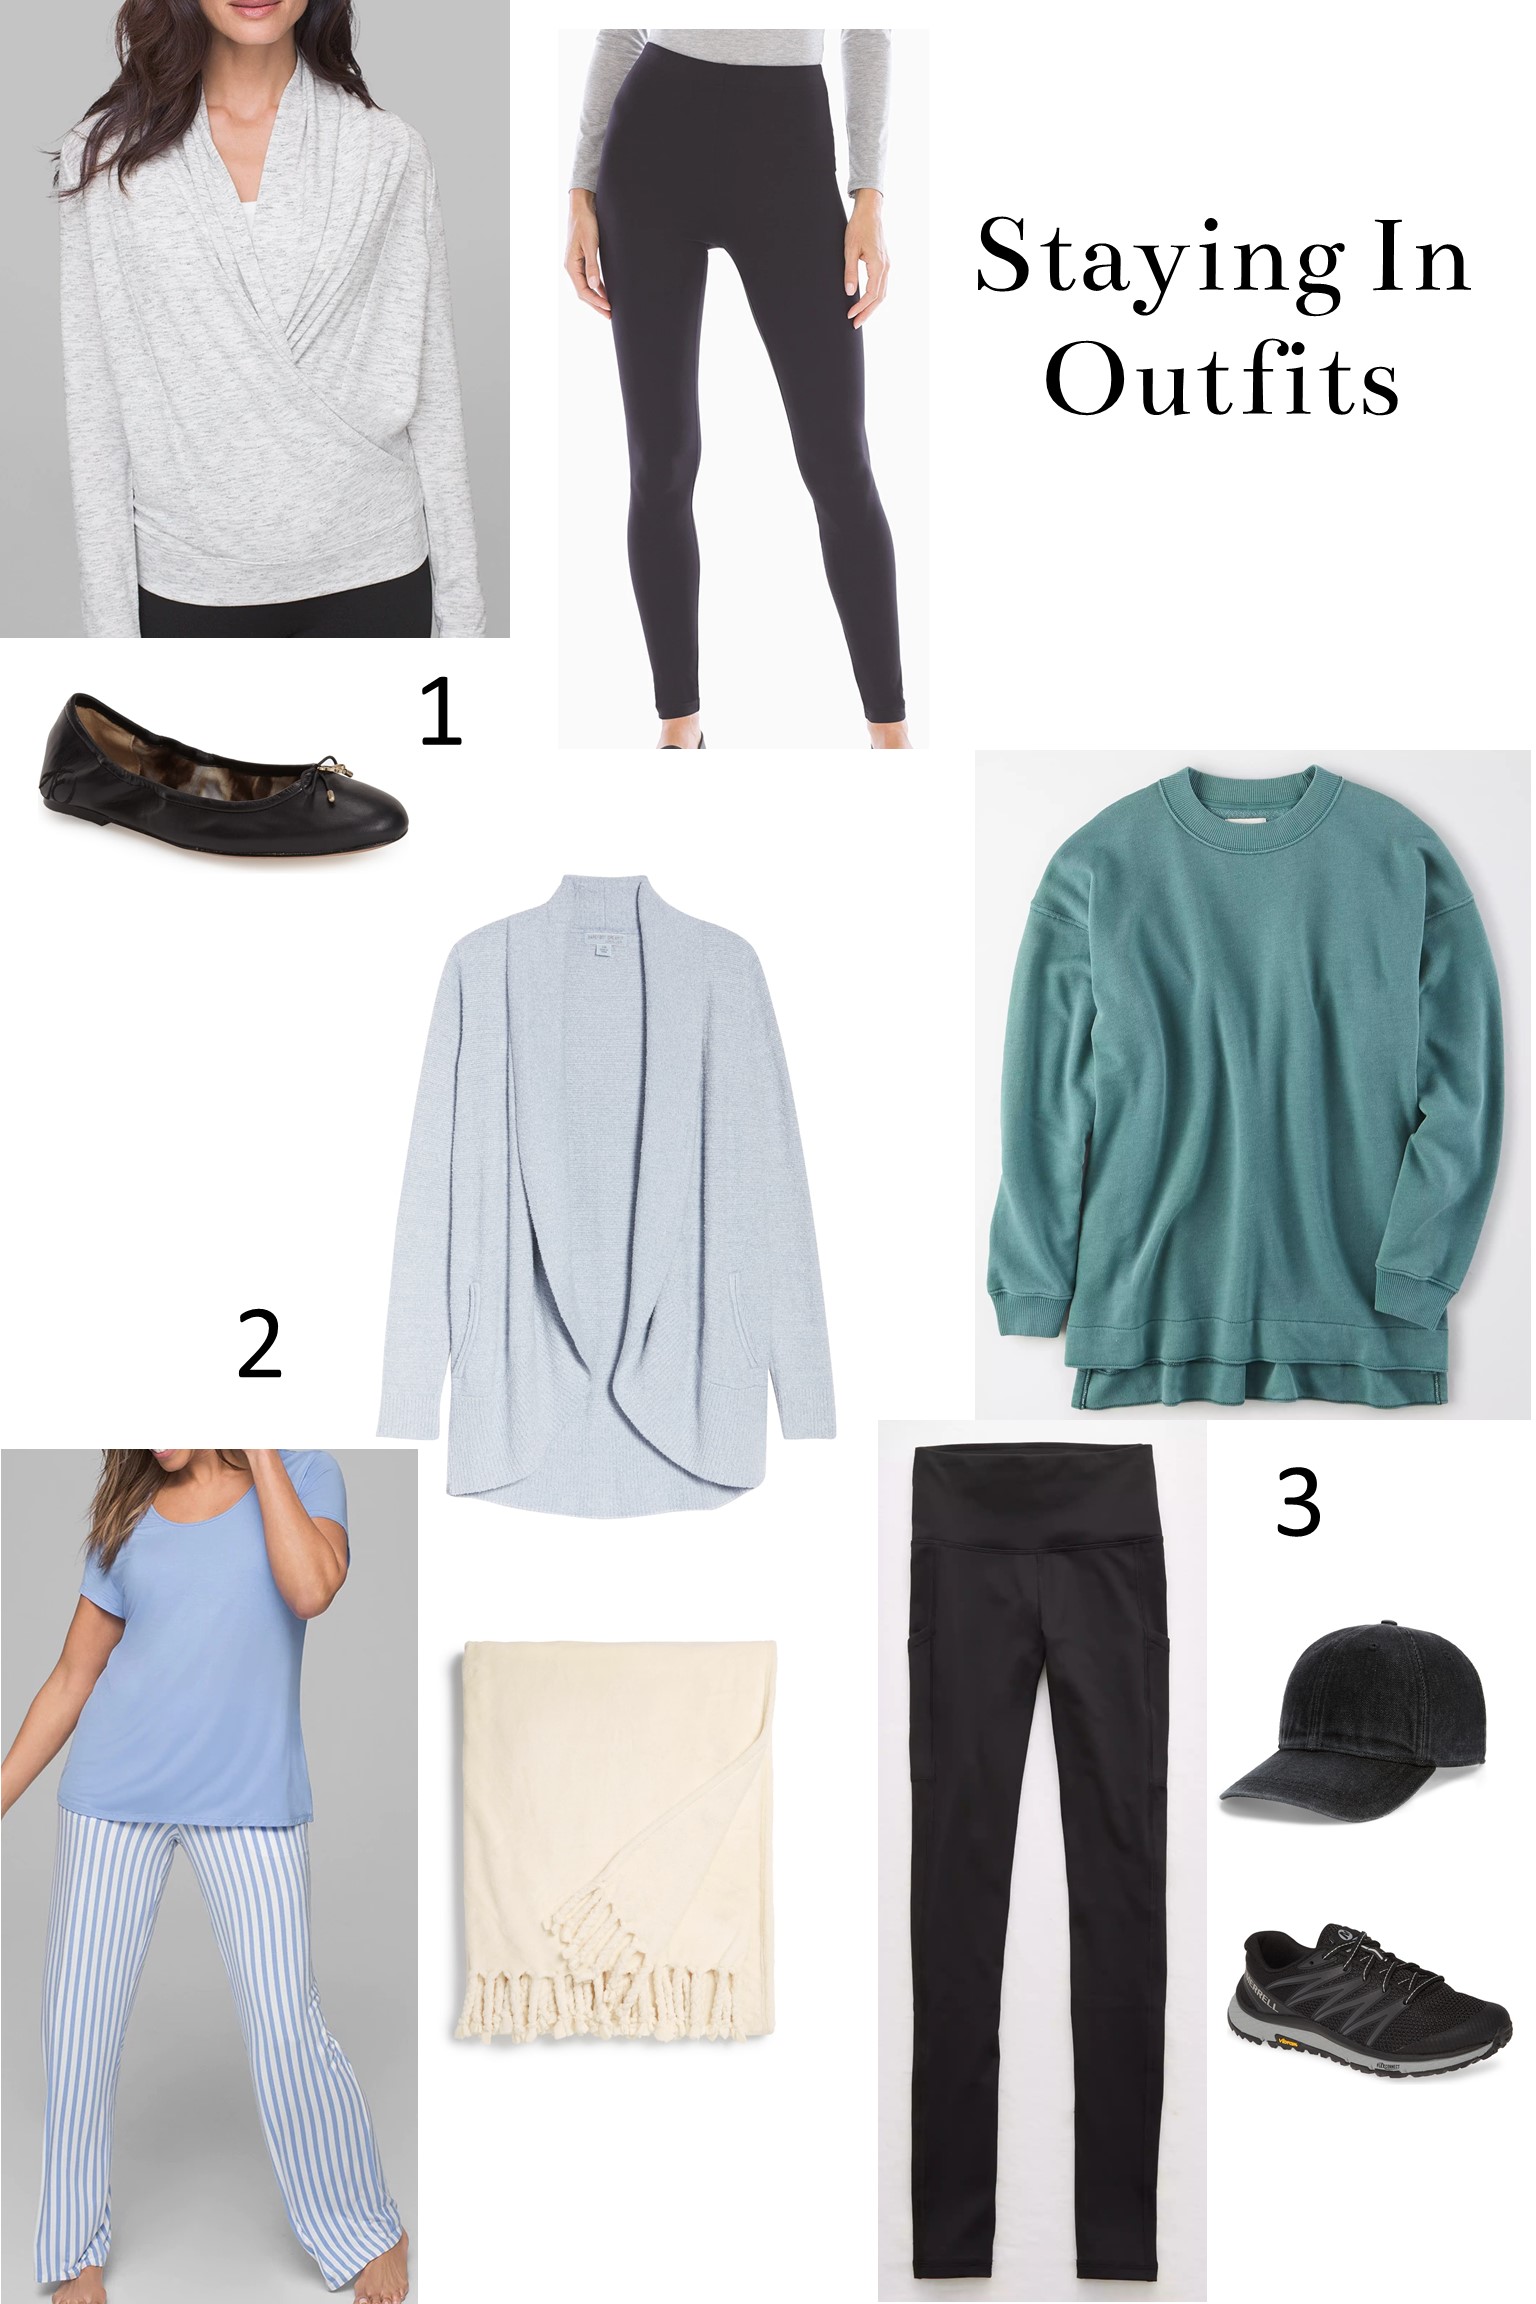 Three Outfits to Lounge in at Home